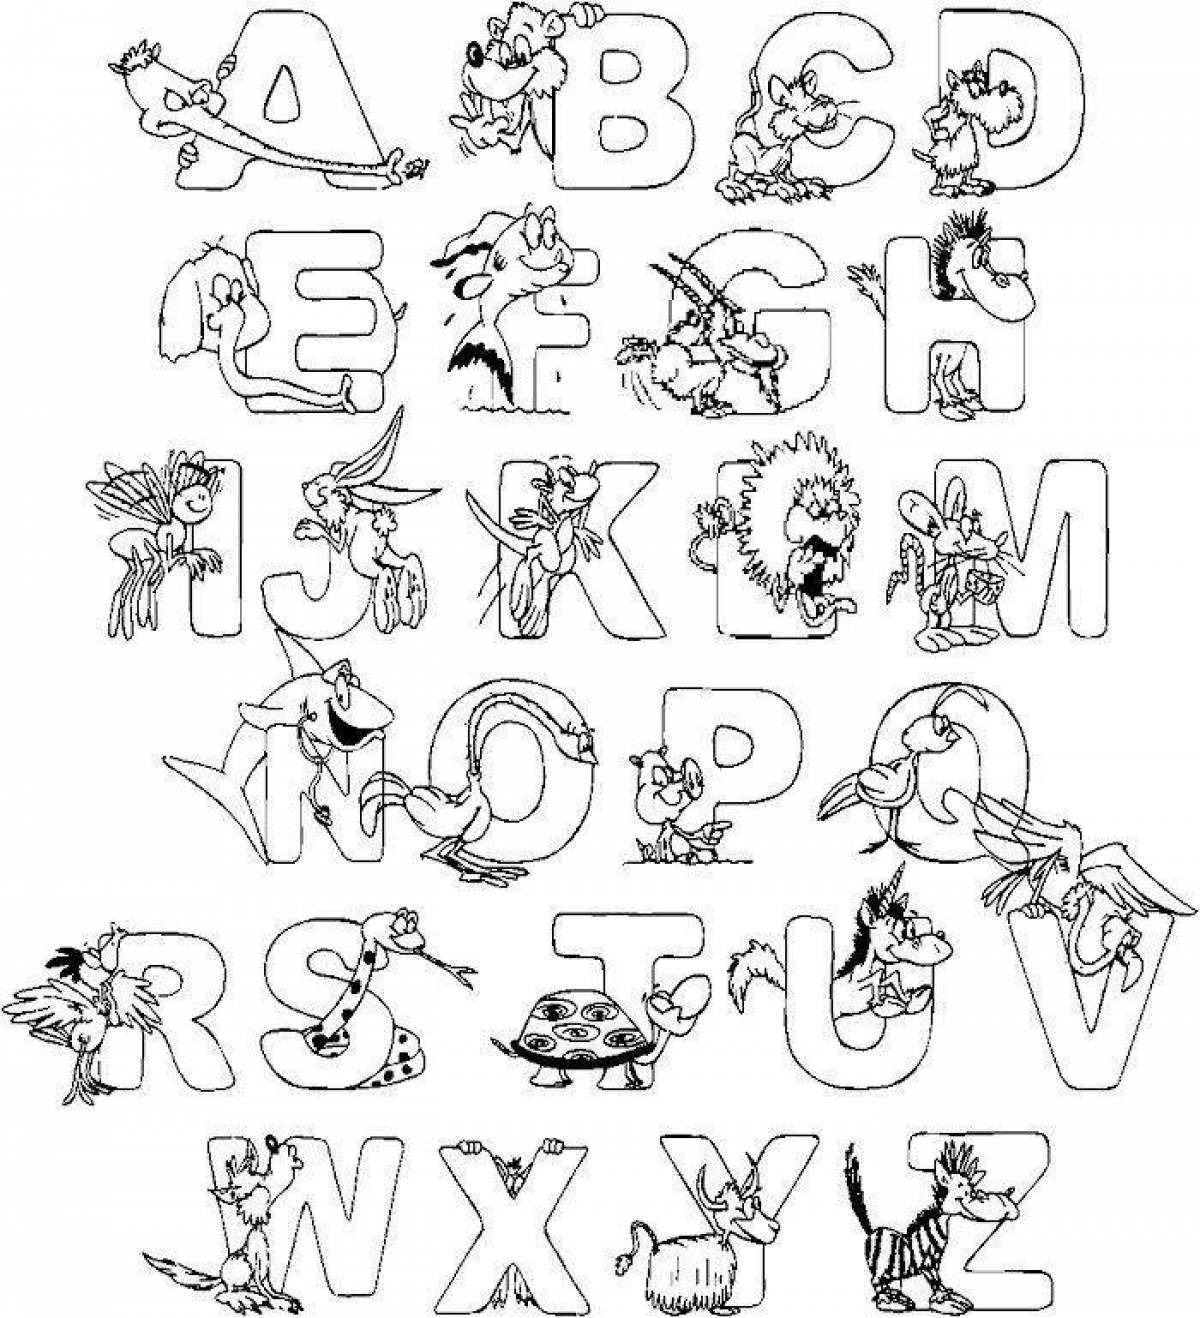 Colorful and vibrant alphabet knowledge coloring page